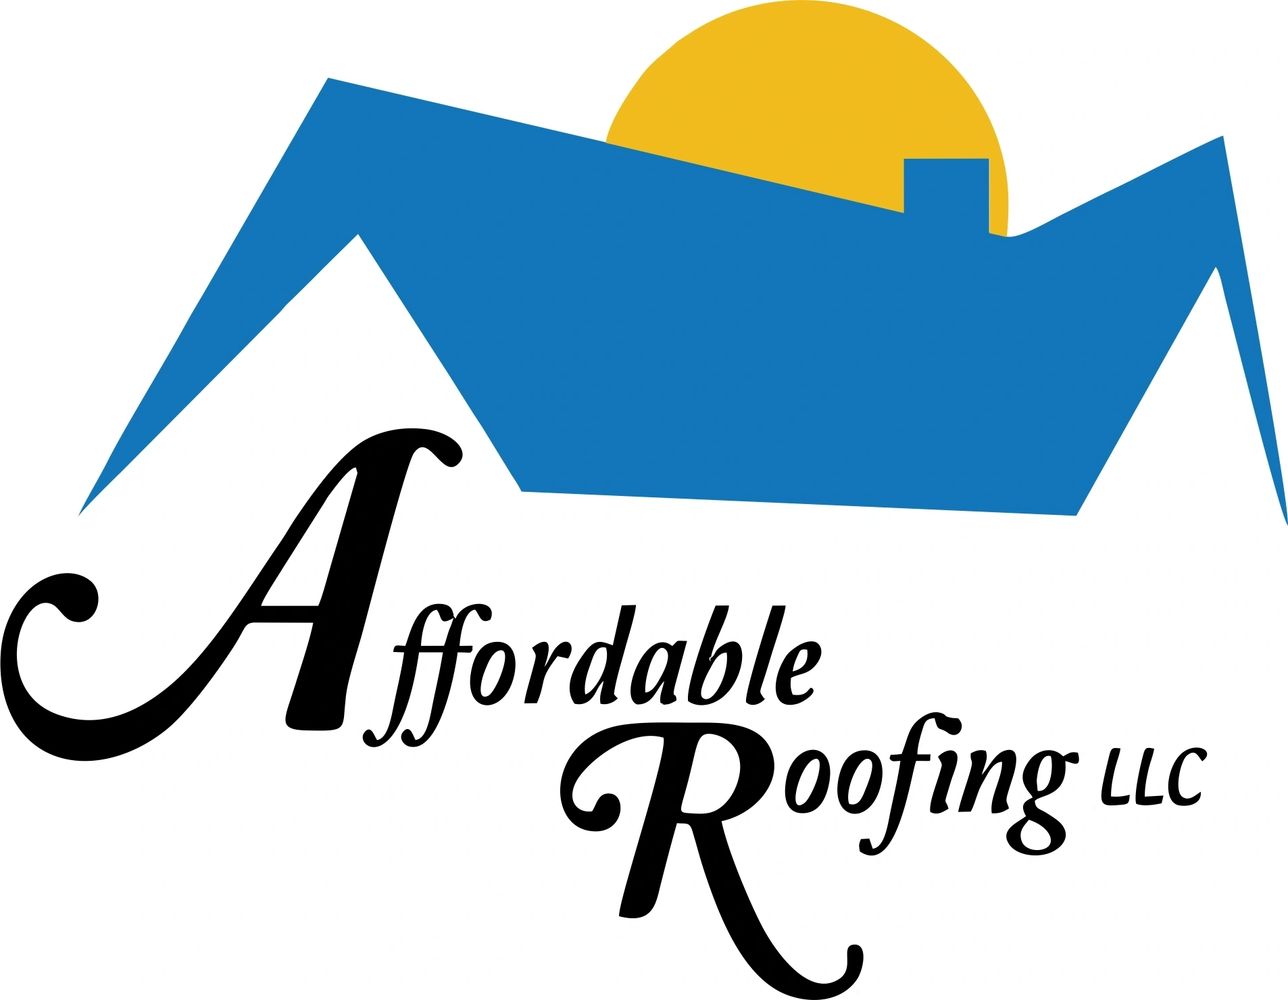 Affordable Roofing LLC Shares The Benefits Of Hiring An Outstanding Roofing Company.